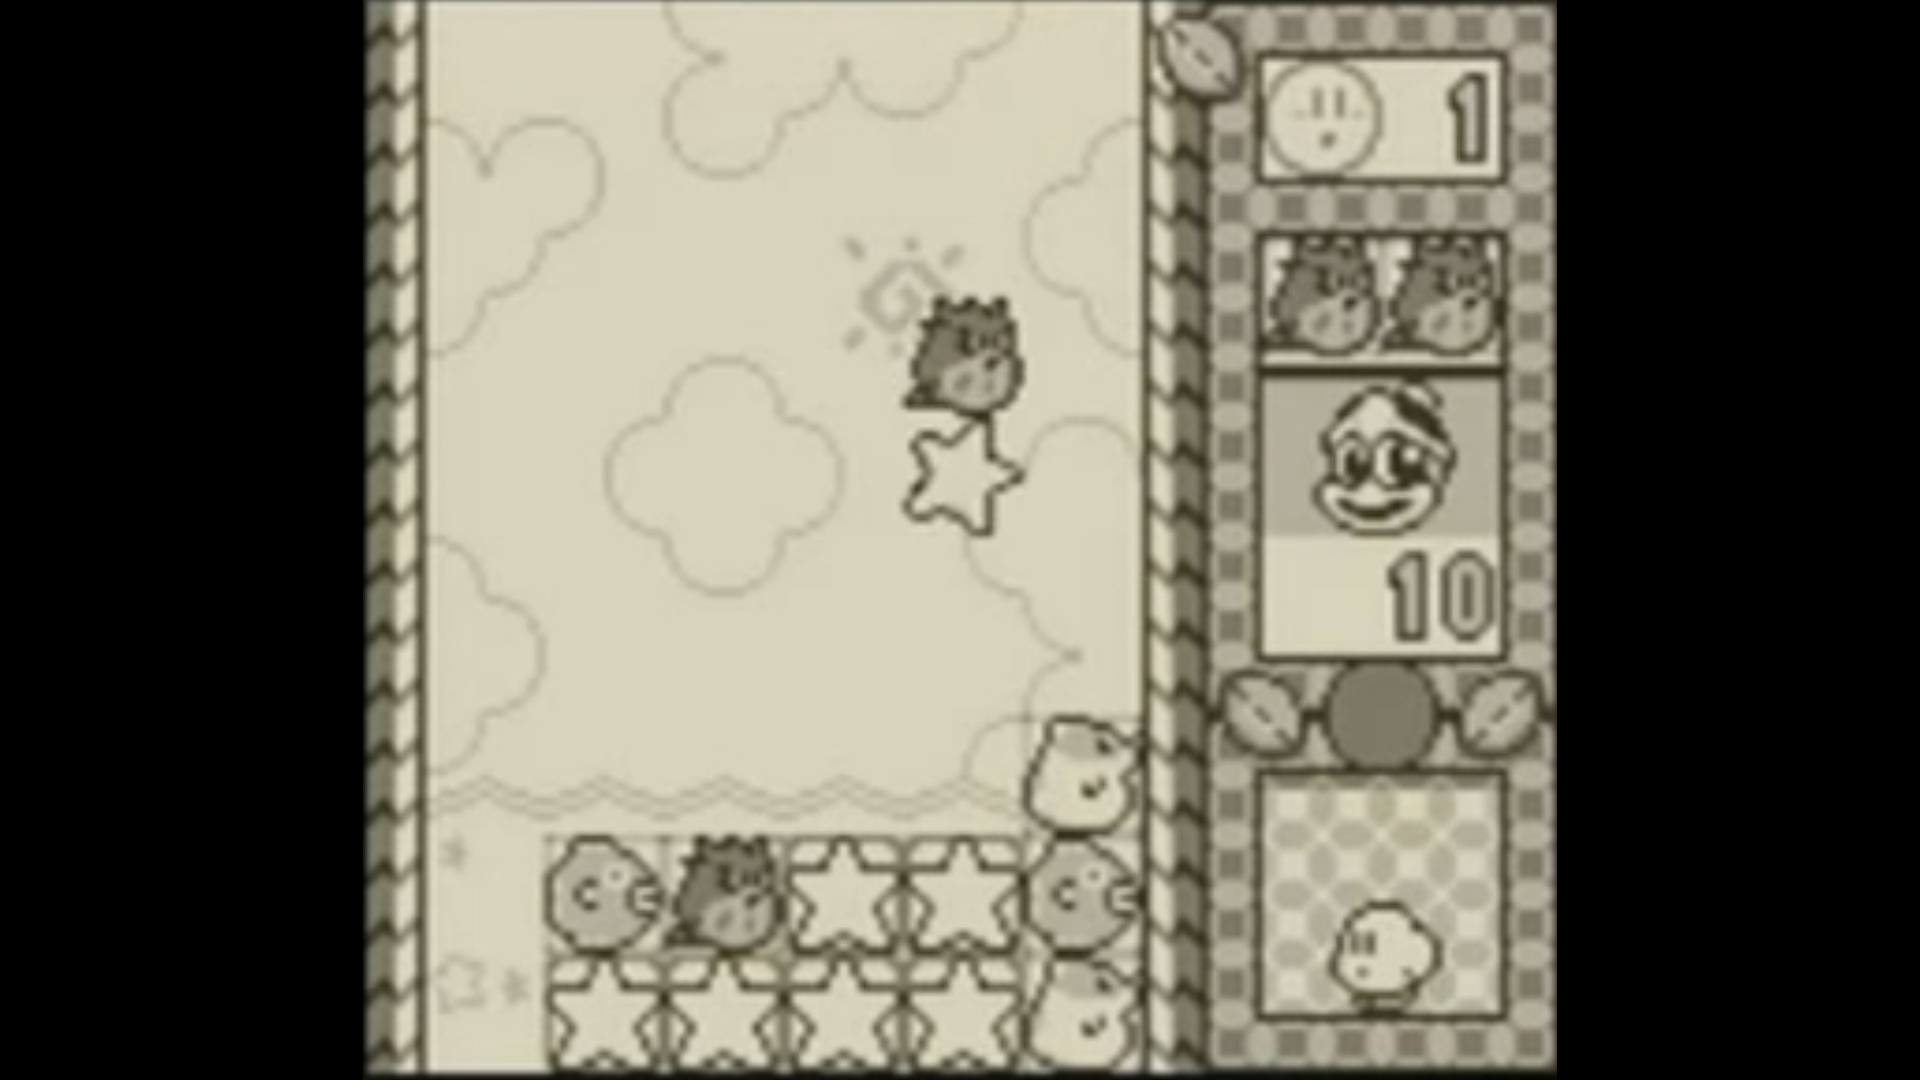 Best Kirby games: Kirby's Star Stacker. Image shows blocks falling in front of a cloudy background, with Kirby and Dedede shown on a bar to the left of the screen, including information on incoming blocks.